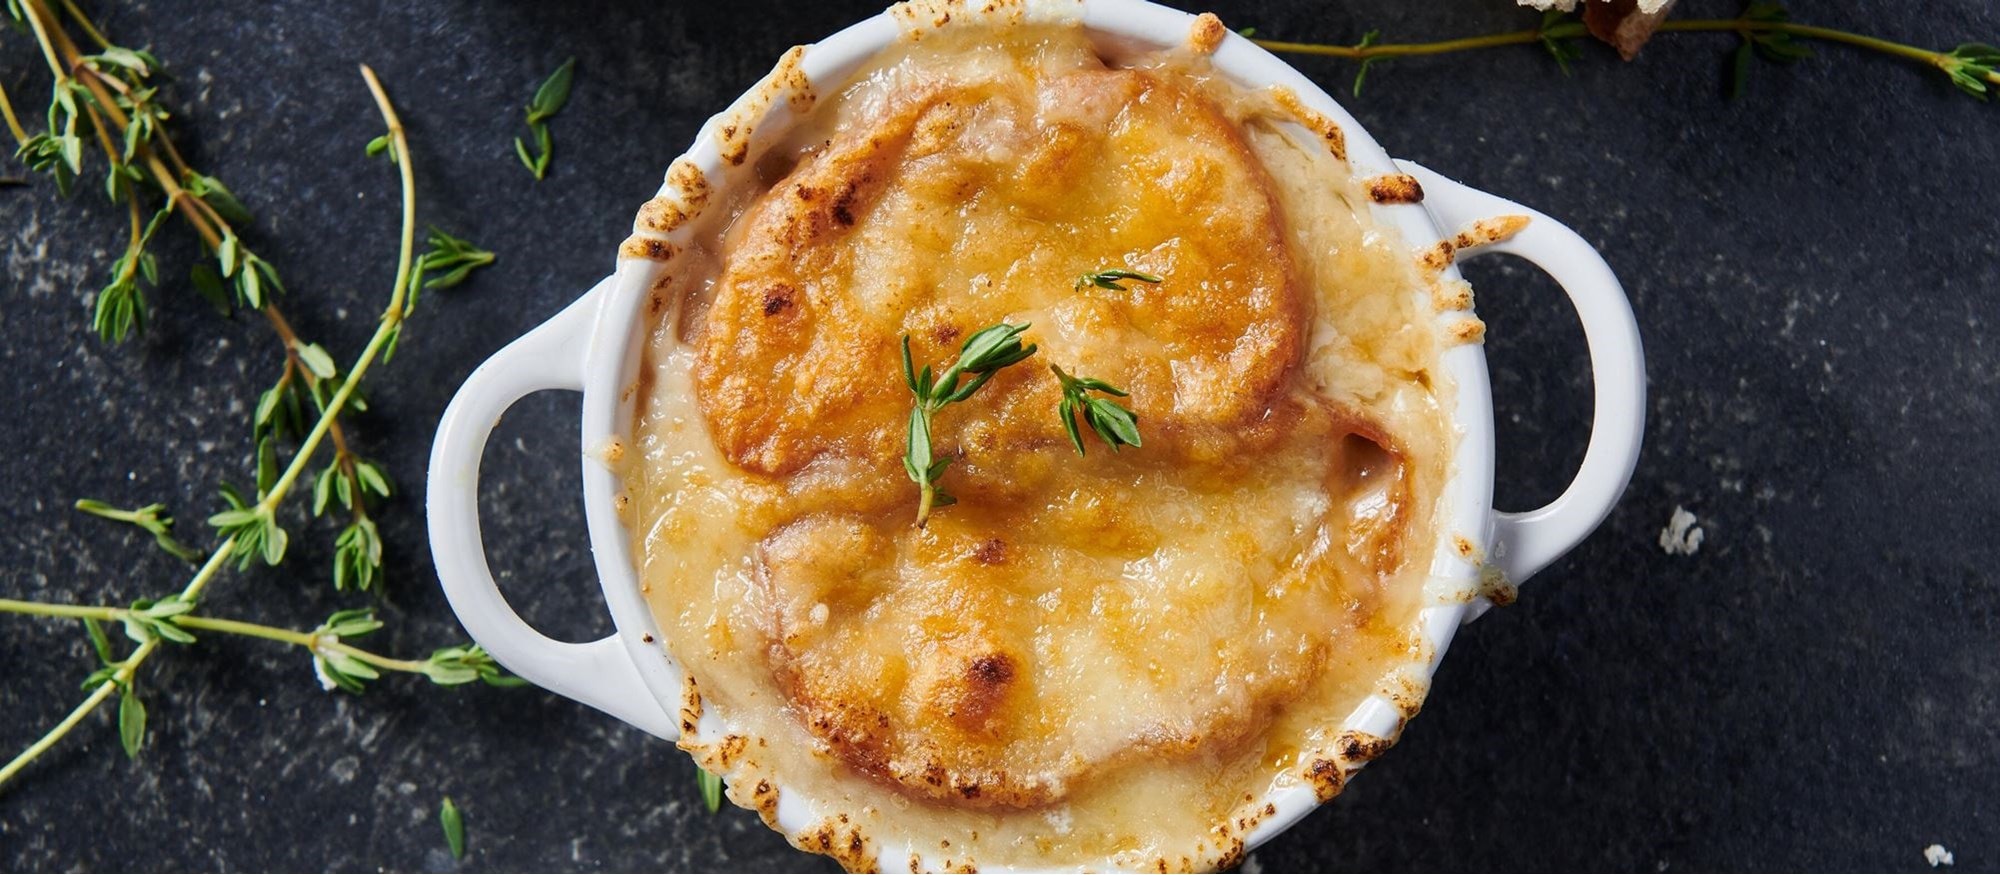 Easy and delicious French Onion Soup recipe using the French Top Mode setting of your Wolf Dual Fuel Range